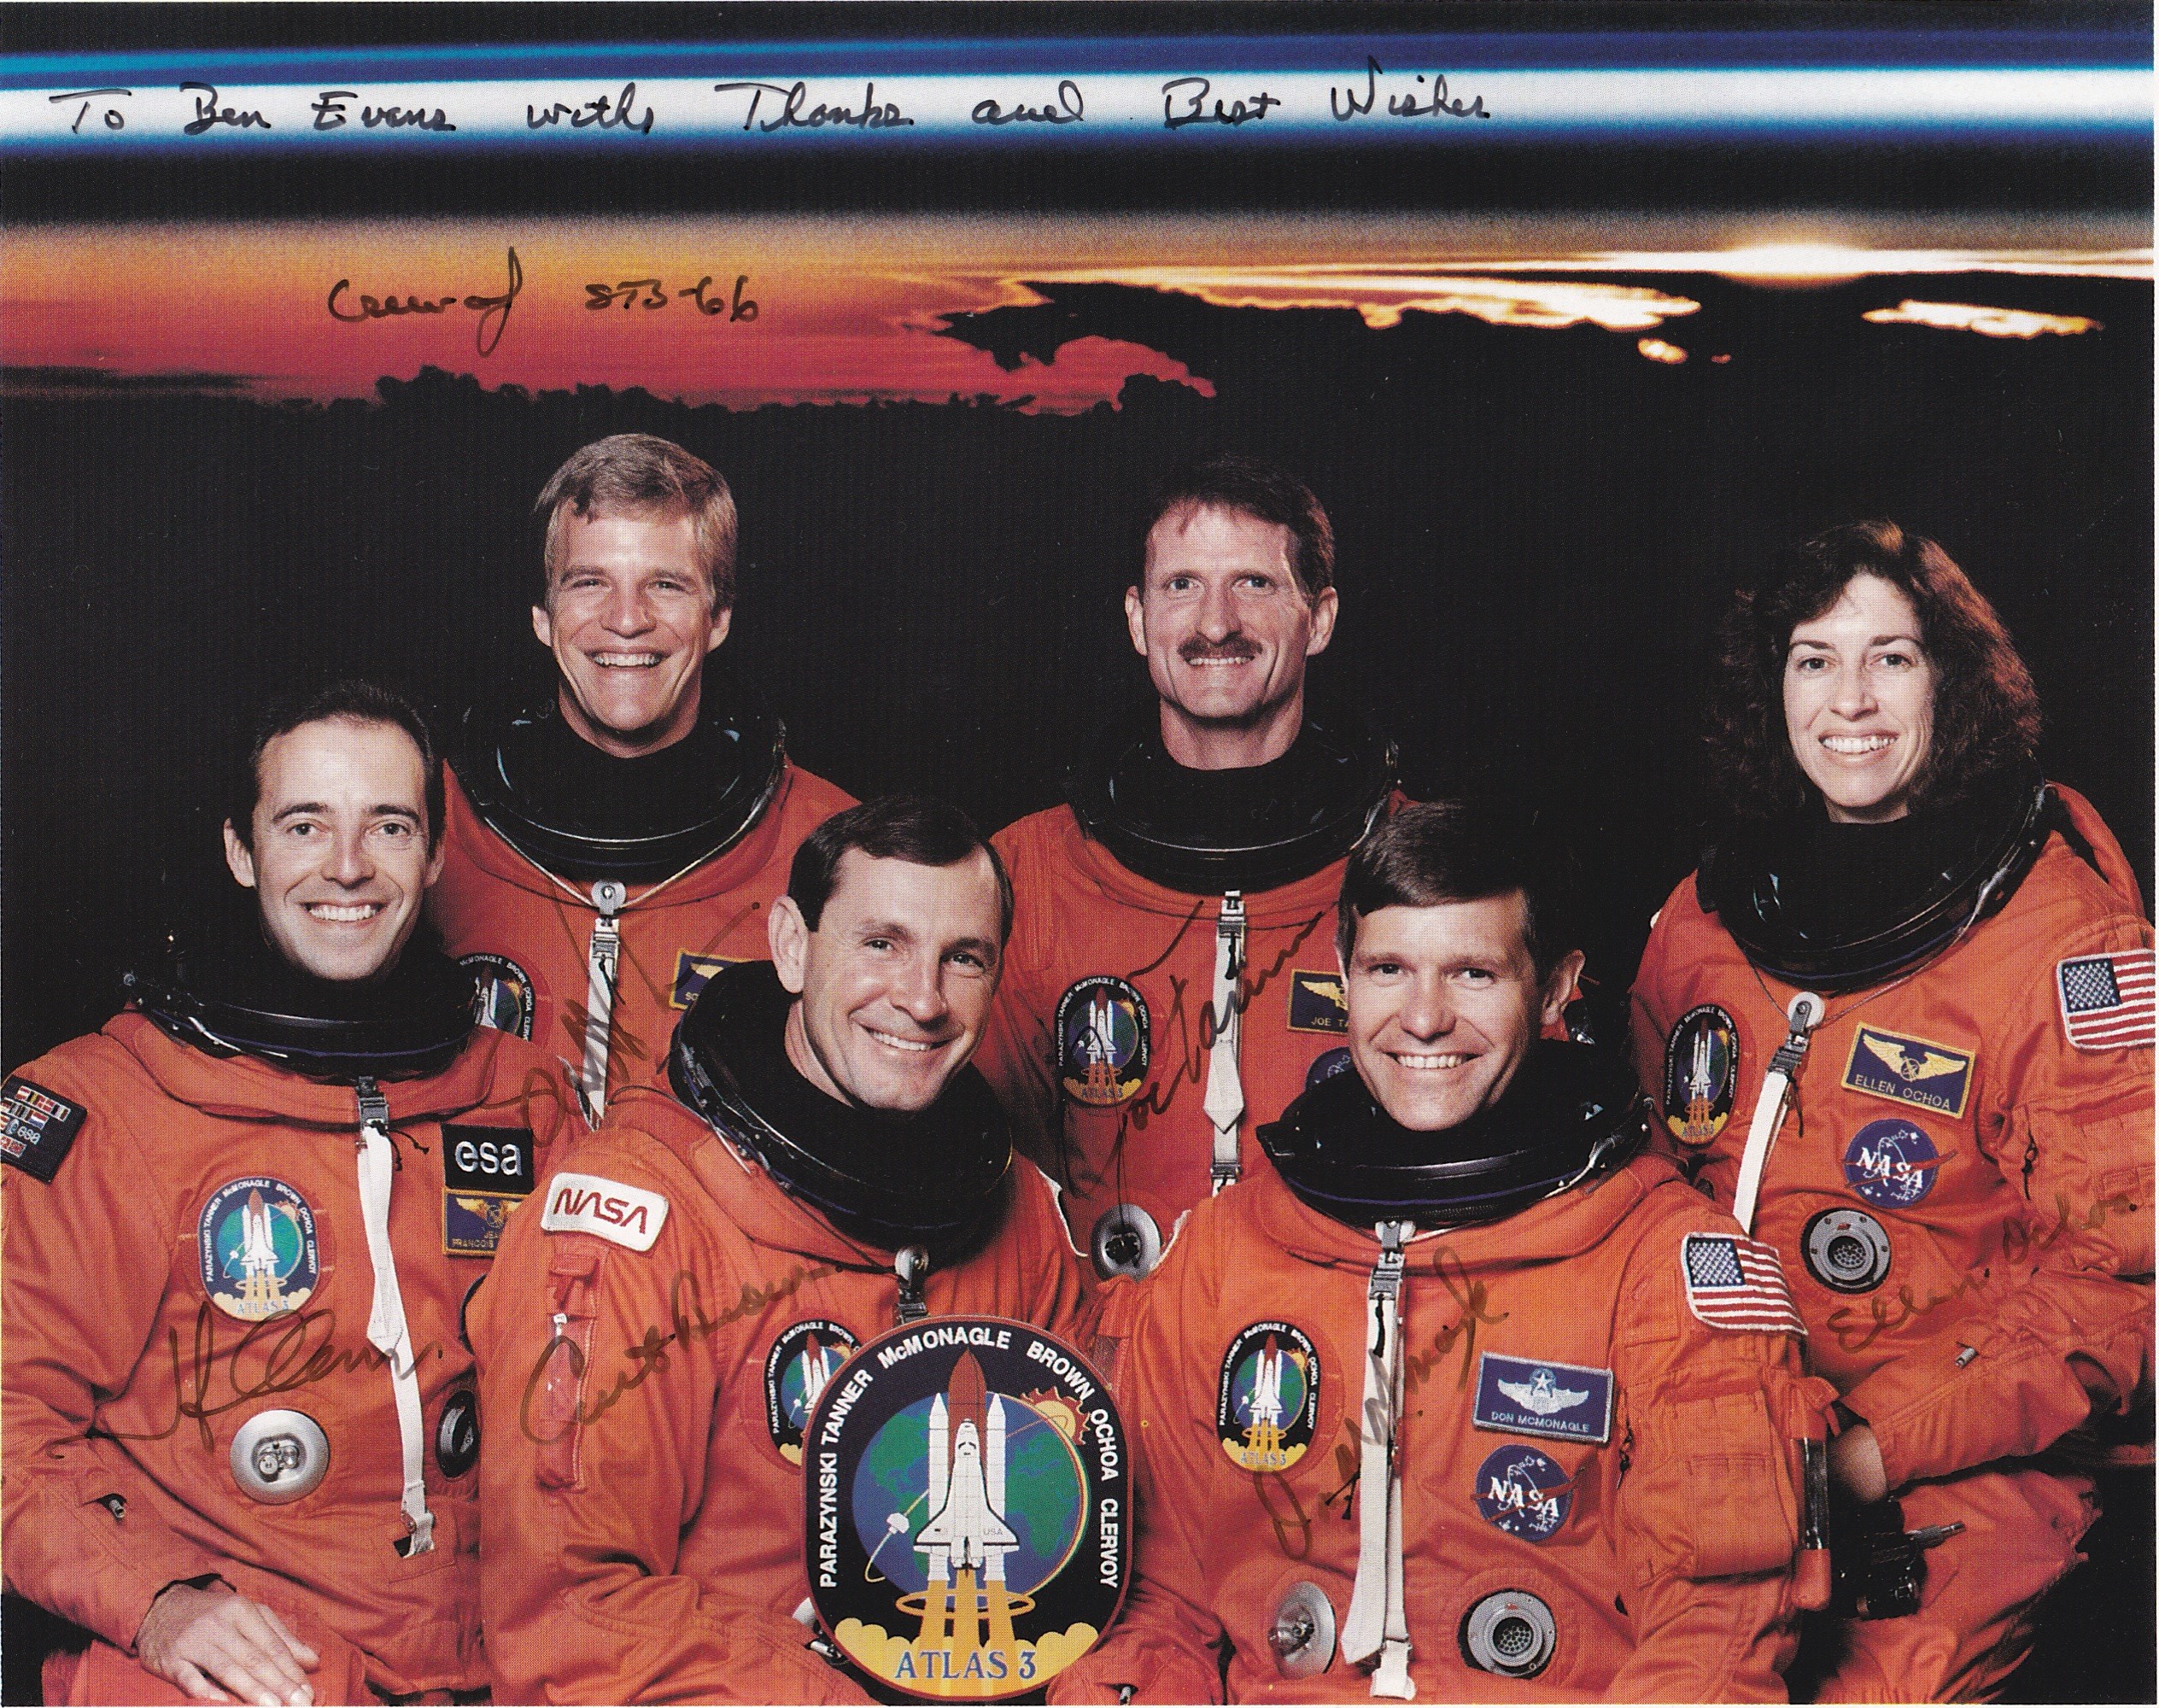 STS-66 signed crew portrait, sent to the author by Commander Don McMonagle (seated at right). He was joined on the crew by (from left) Jean-Francois Clervoy, Scott Parazynski, Curt Brown, Joe Tanner and Ellen Ochoa. Photo Credit: NASA/Ben Evans personal collection 